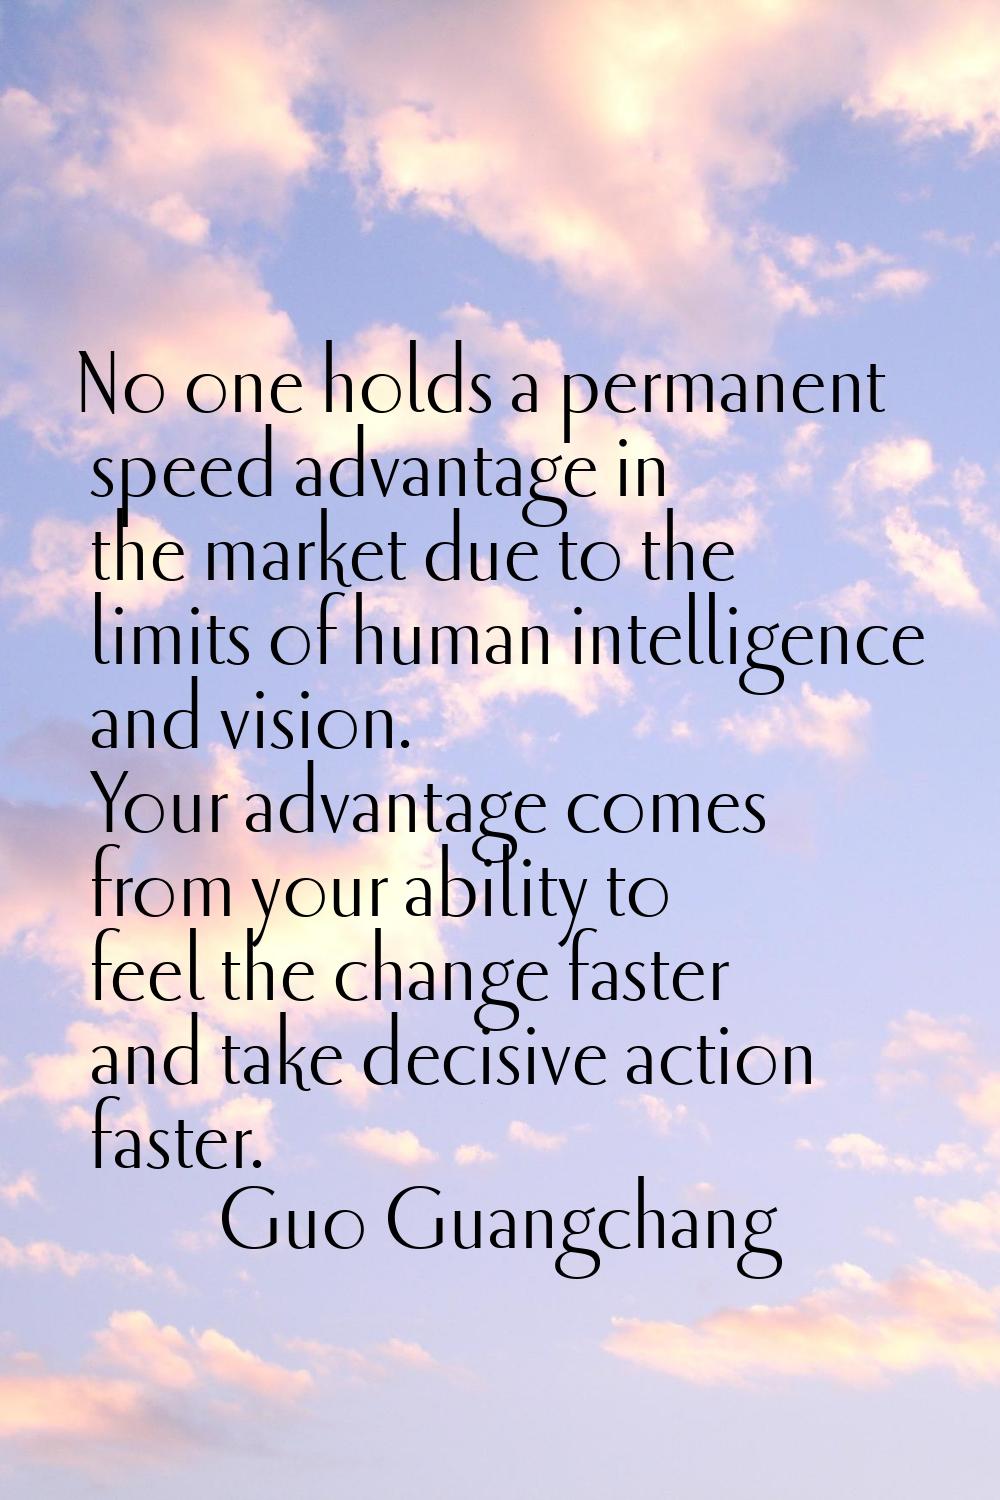 No one holds a permanent speed advantage in the market due to the limits of human intelligence and 